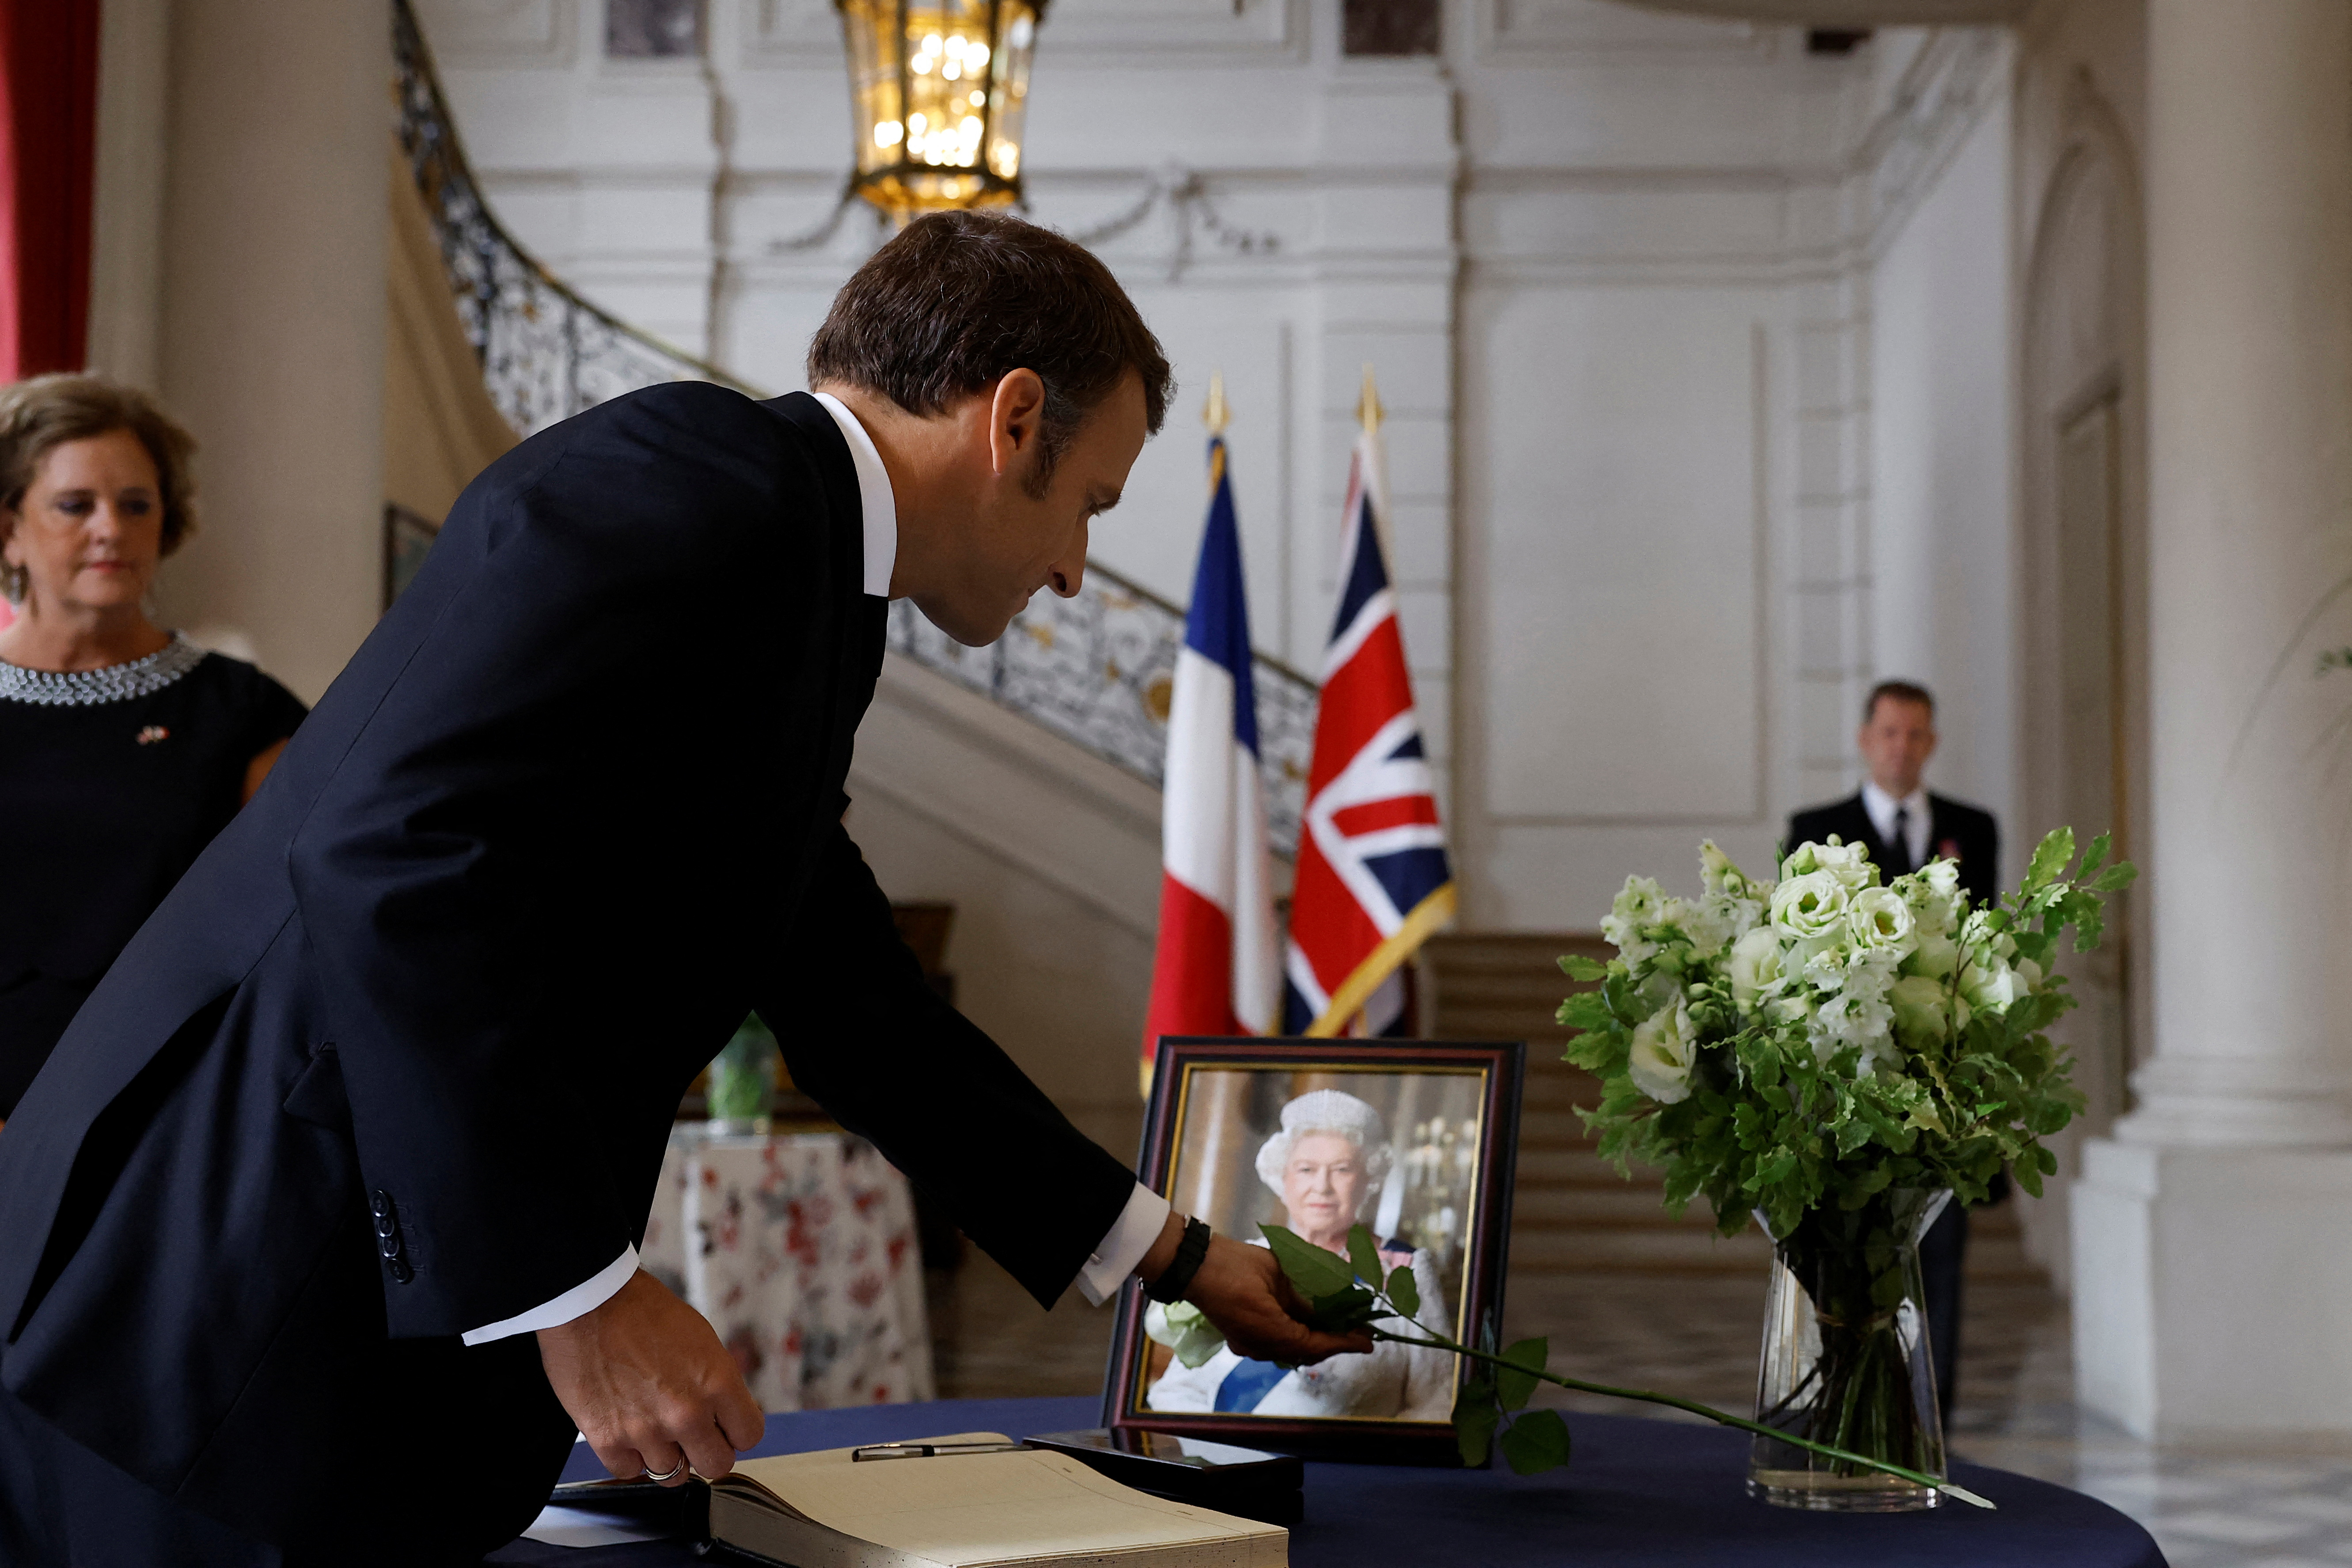 French President Emmanuel Macron places a white rose next to a portrait of Queen Elizabeth as British Ambassador to France Menna Rawlings looks on during the signature of a condolence book, following the passing of Britain's Queen Elizabeth, at the British Embassy in Paris, France, September 9, 2022. REUTERS/Christian Hartmann/Pool